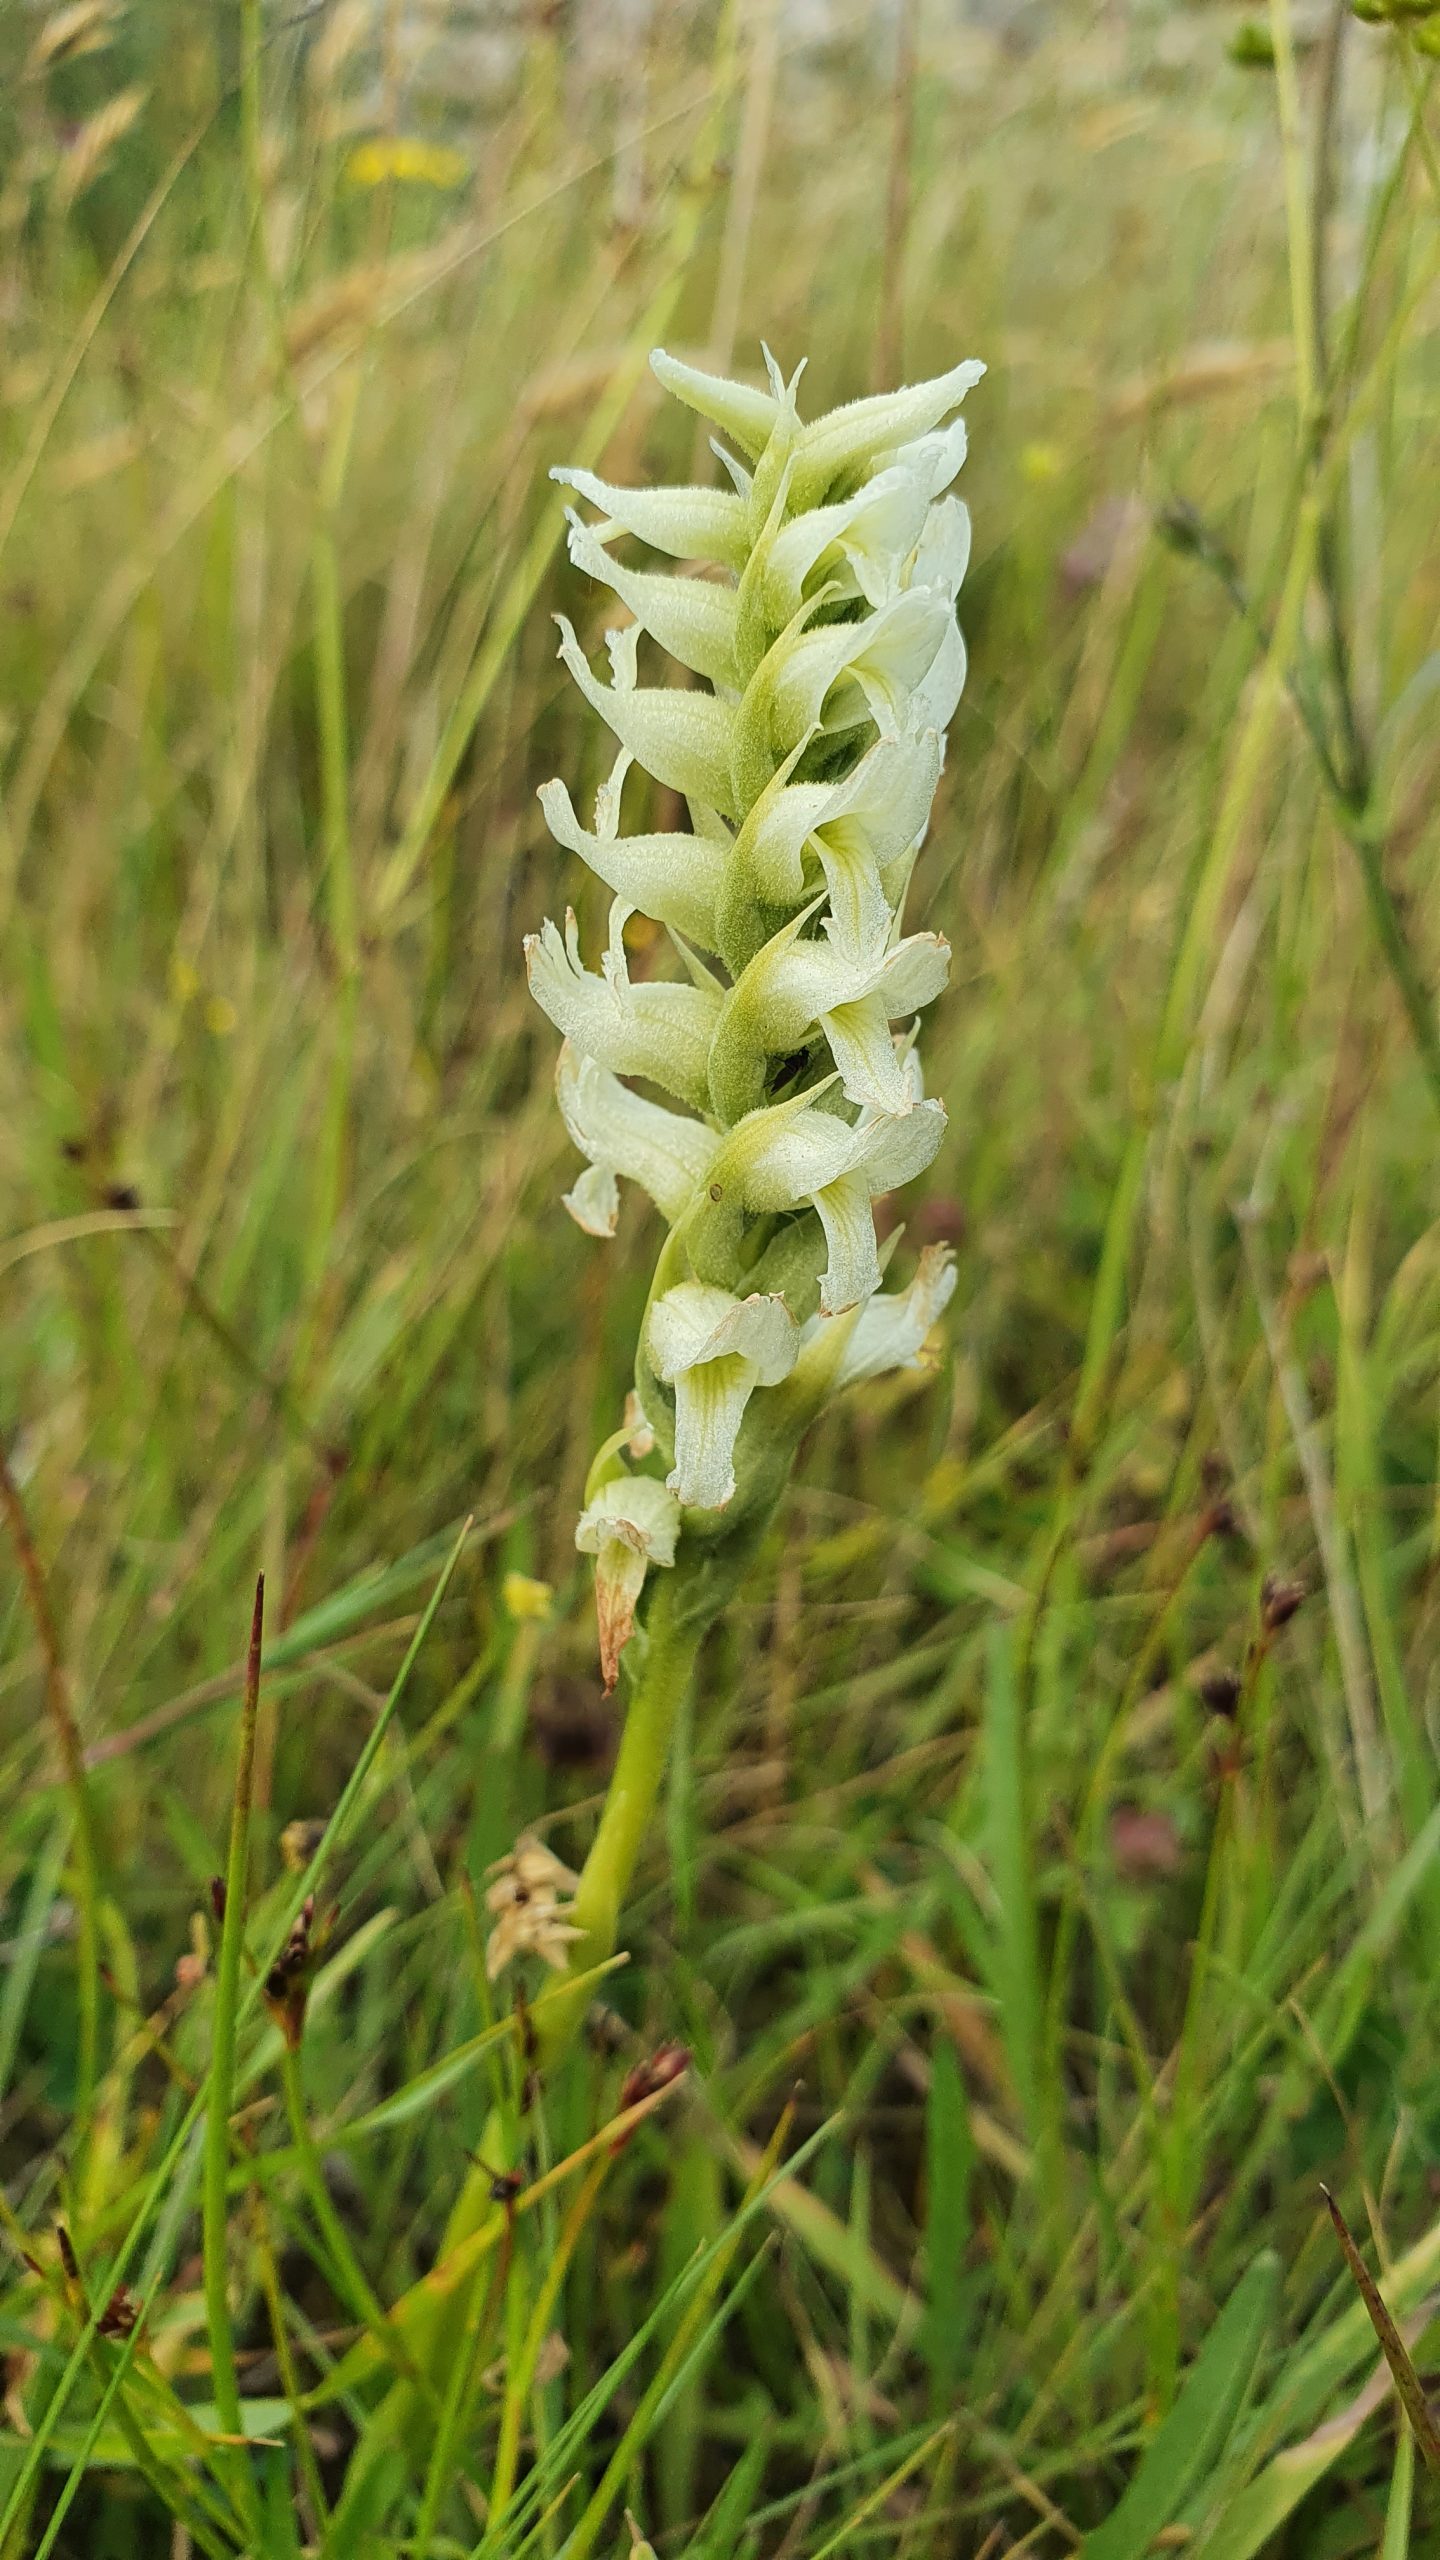 Survey Successes: Snakes and Lady’s Tresses